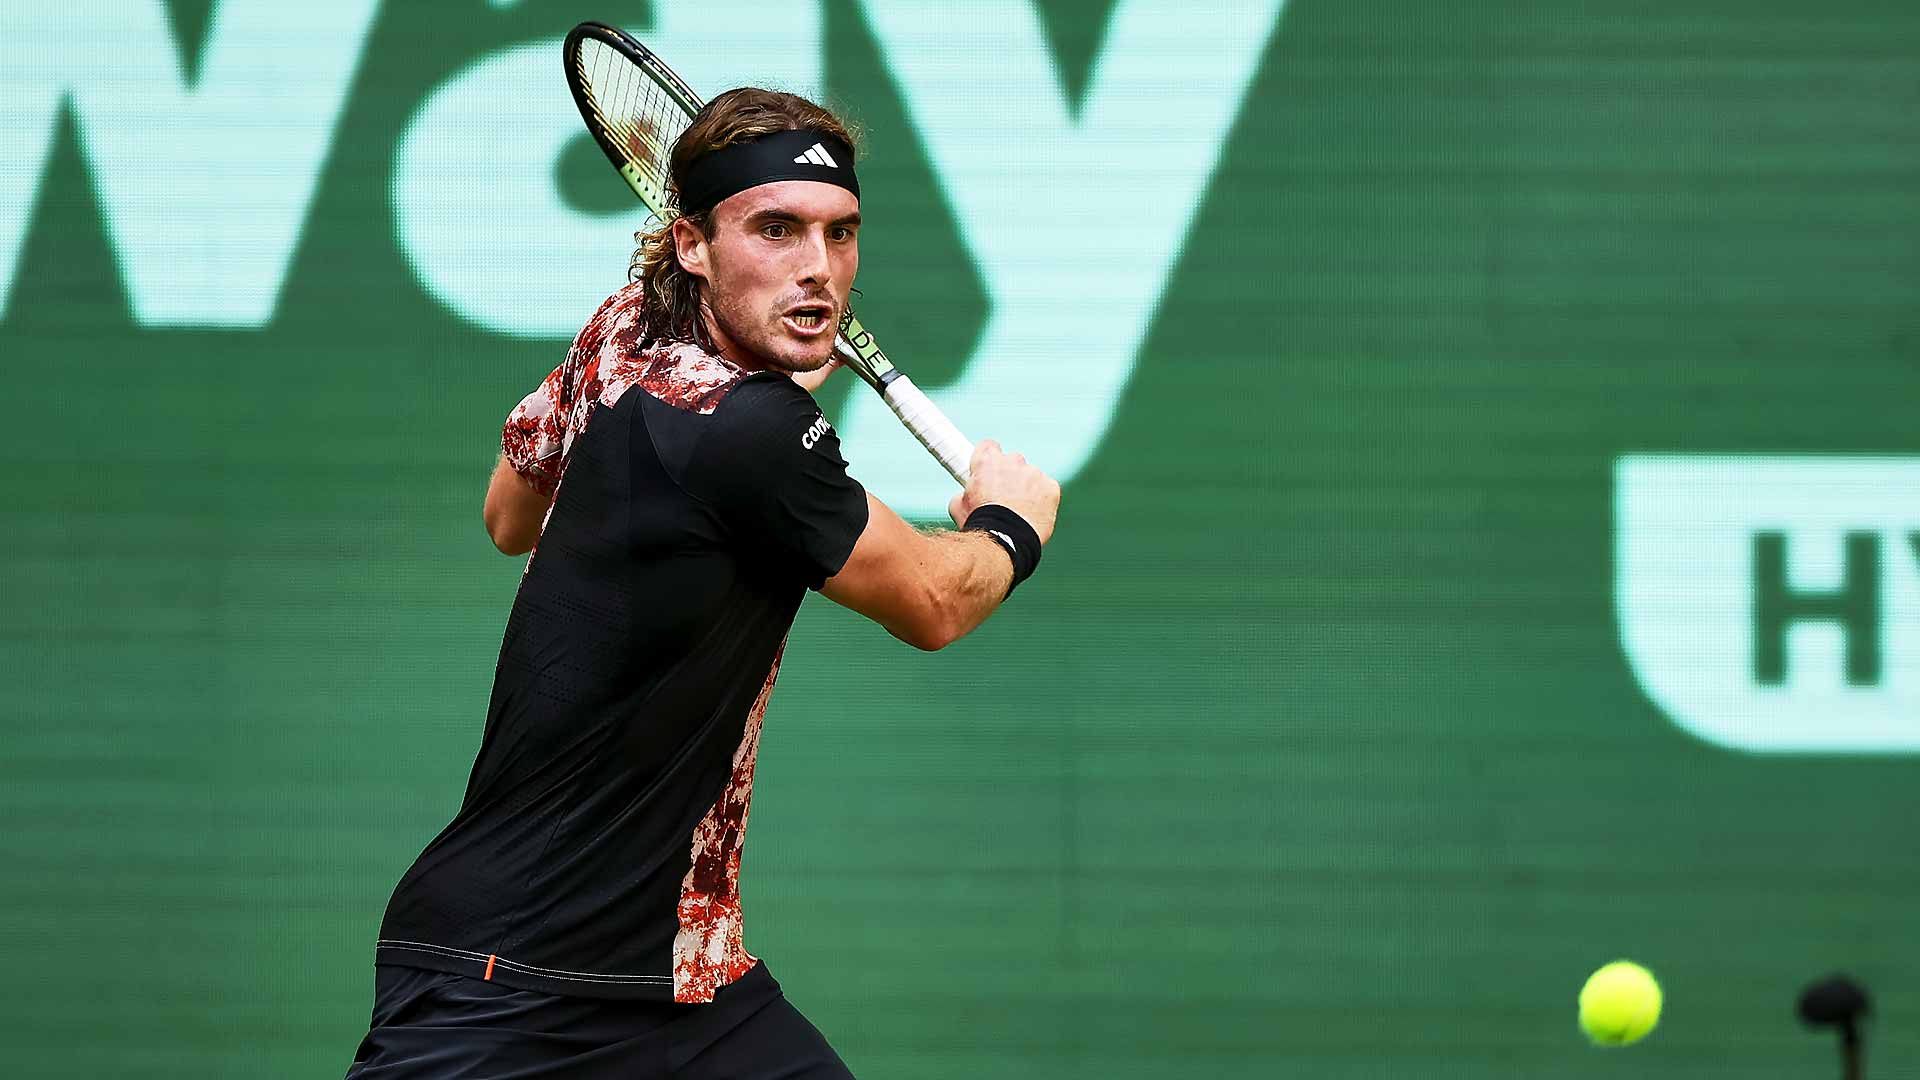 Stefanos Tsitsipas hits 46 winners en route to victory against Gregoire Barrere on Monday at the Terra Wortmann Open in Halle.